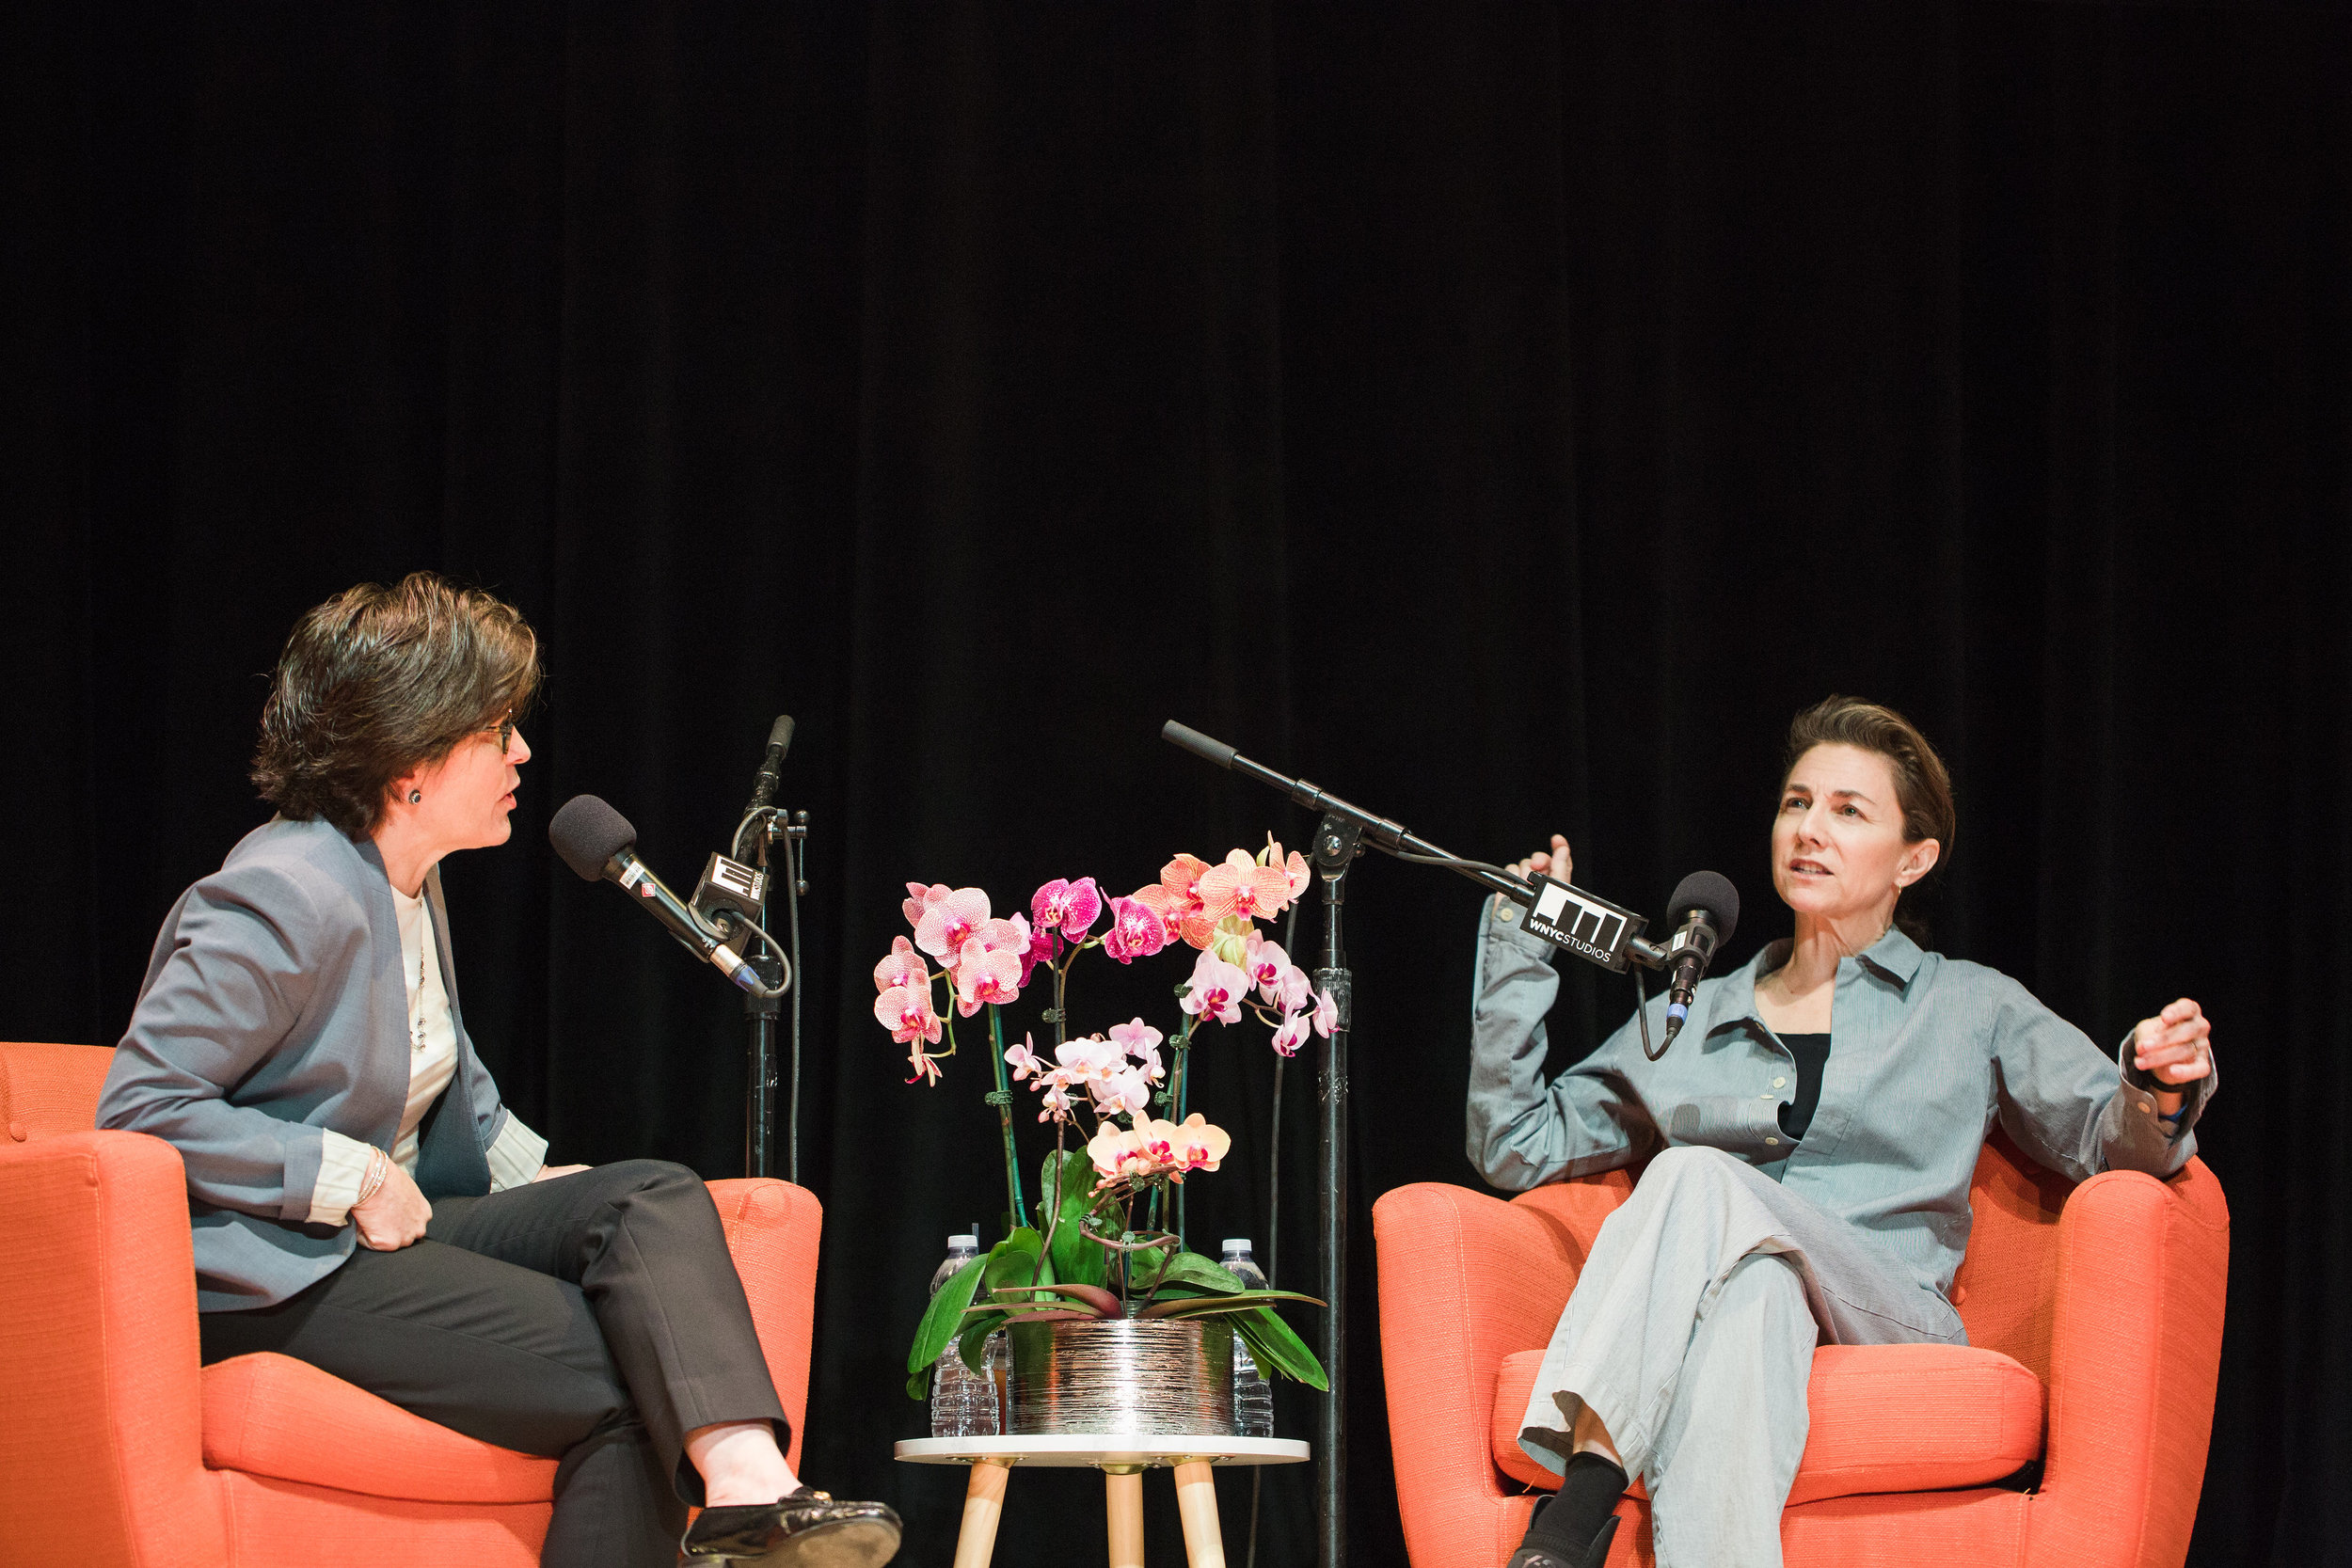 Kara Swisher on stage interview for Recode/Decode